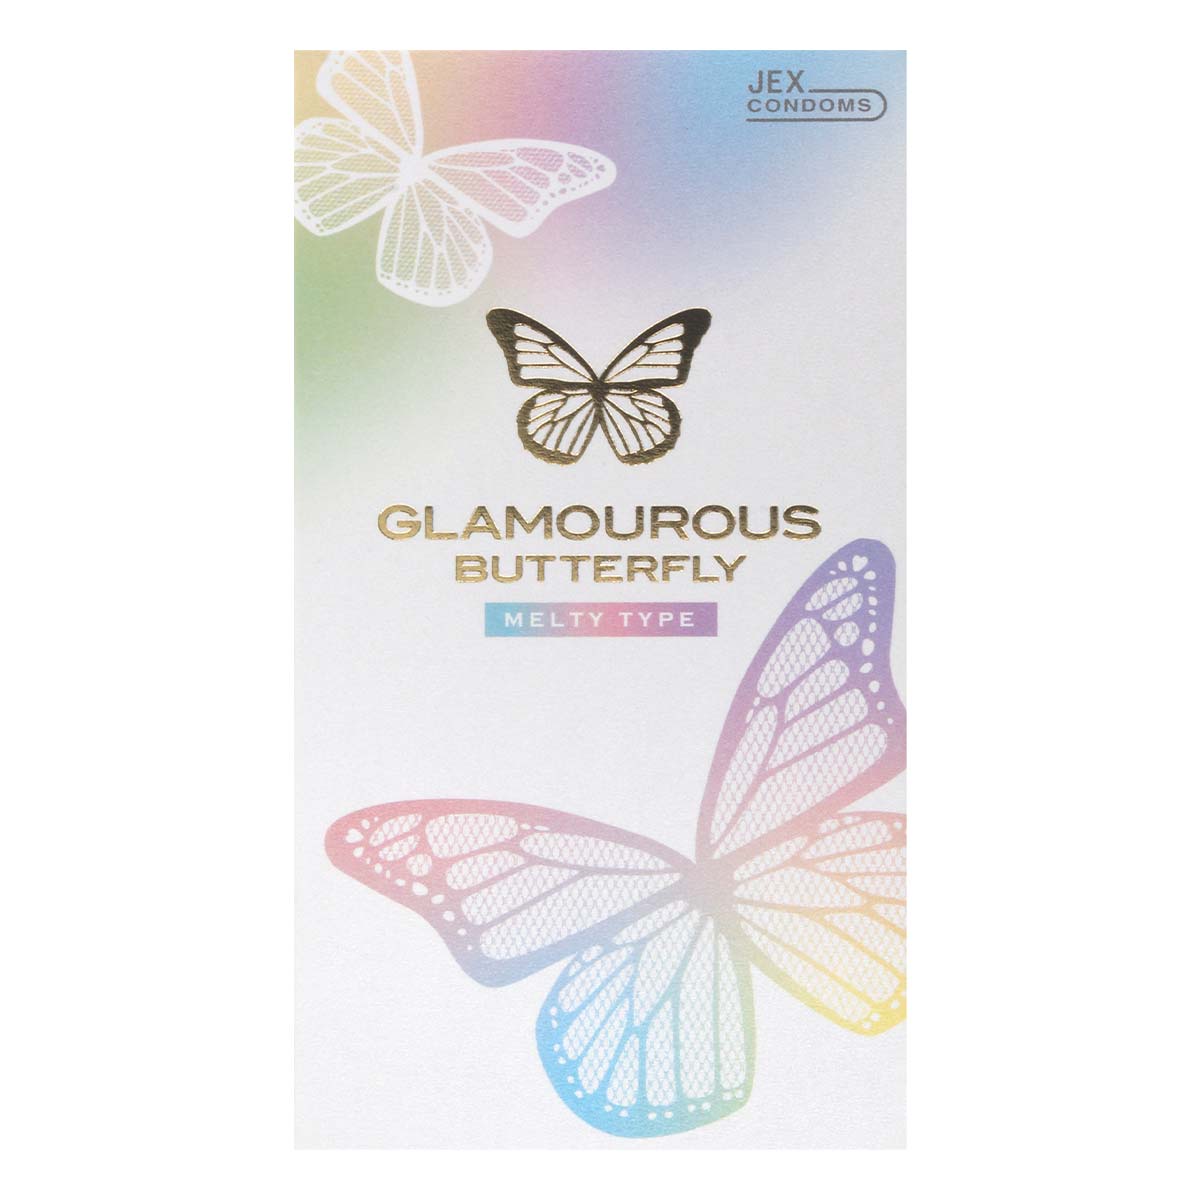 Glamourous Butterfly Melty Type 10's Pack Latex Condom-p_2